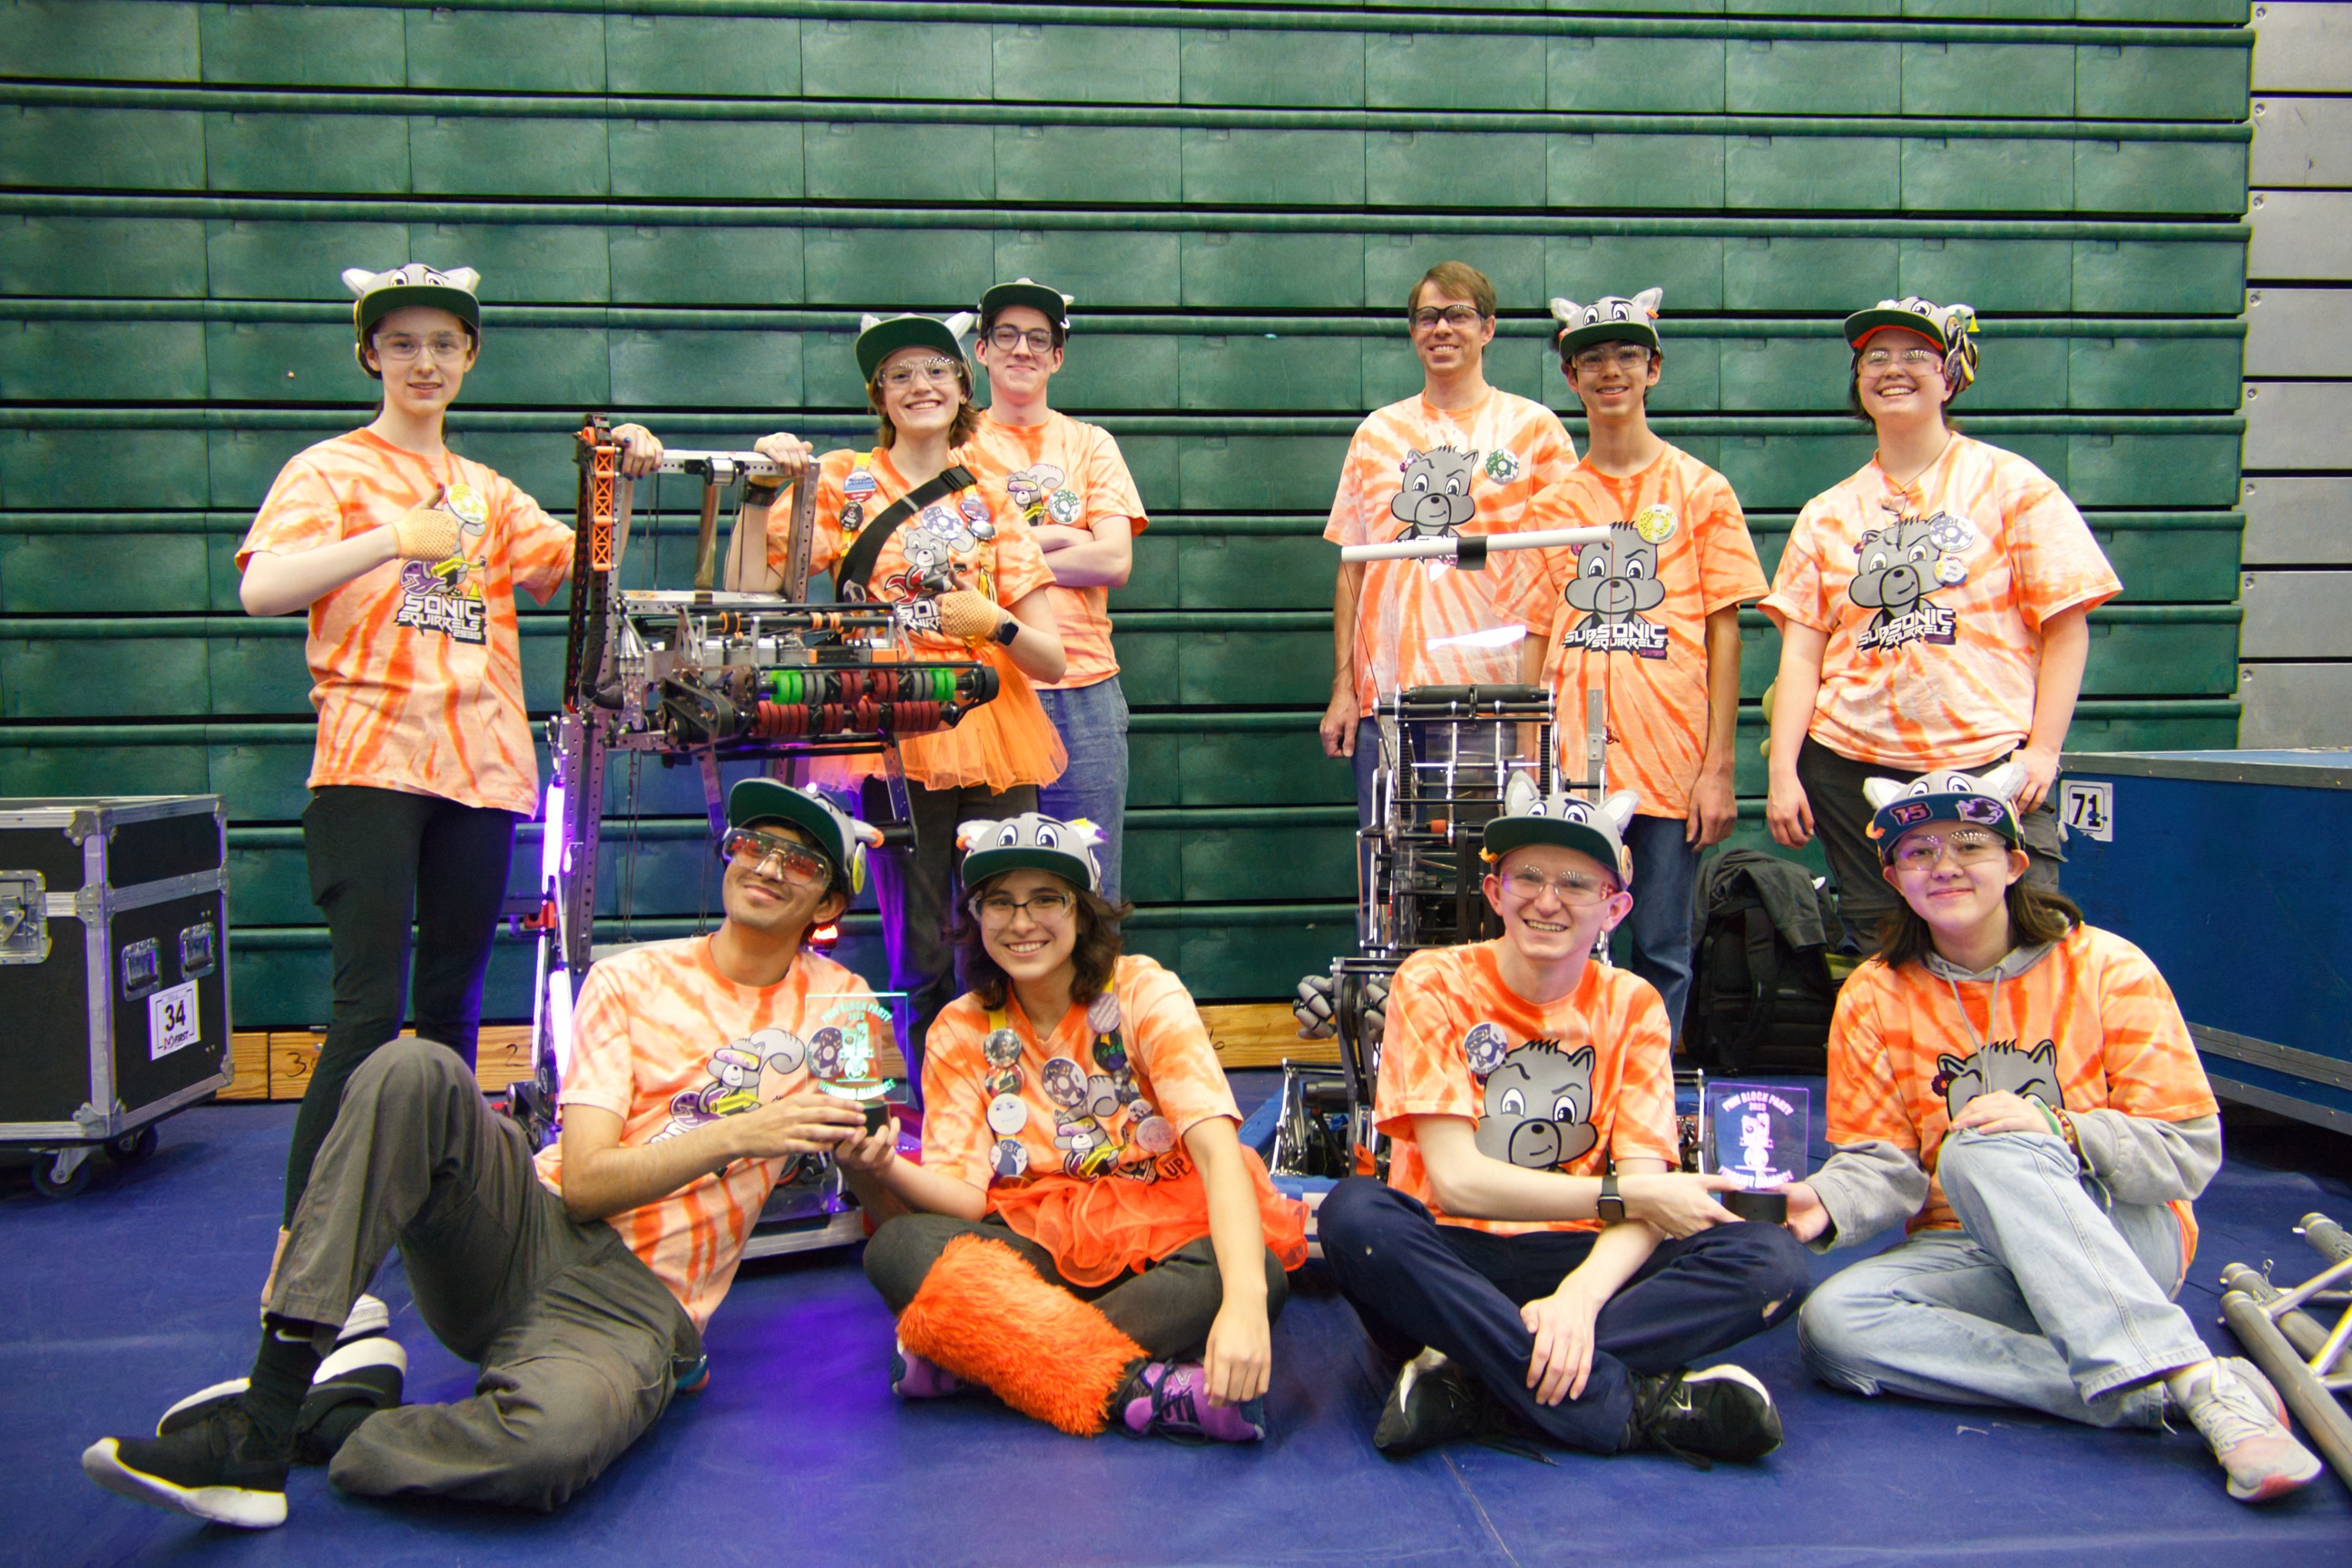 Team 2930 and sub-team 9999, the winners and finalists at PNW Block Party. 